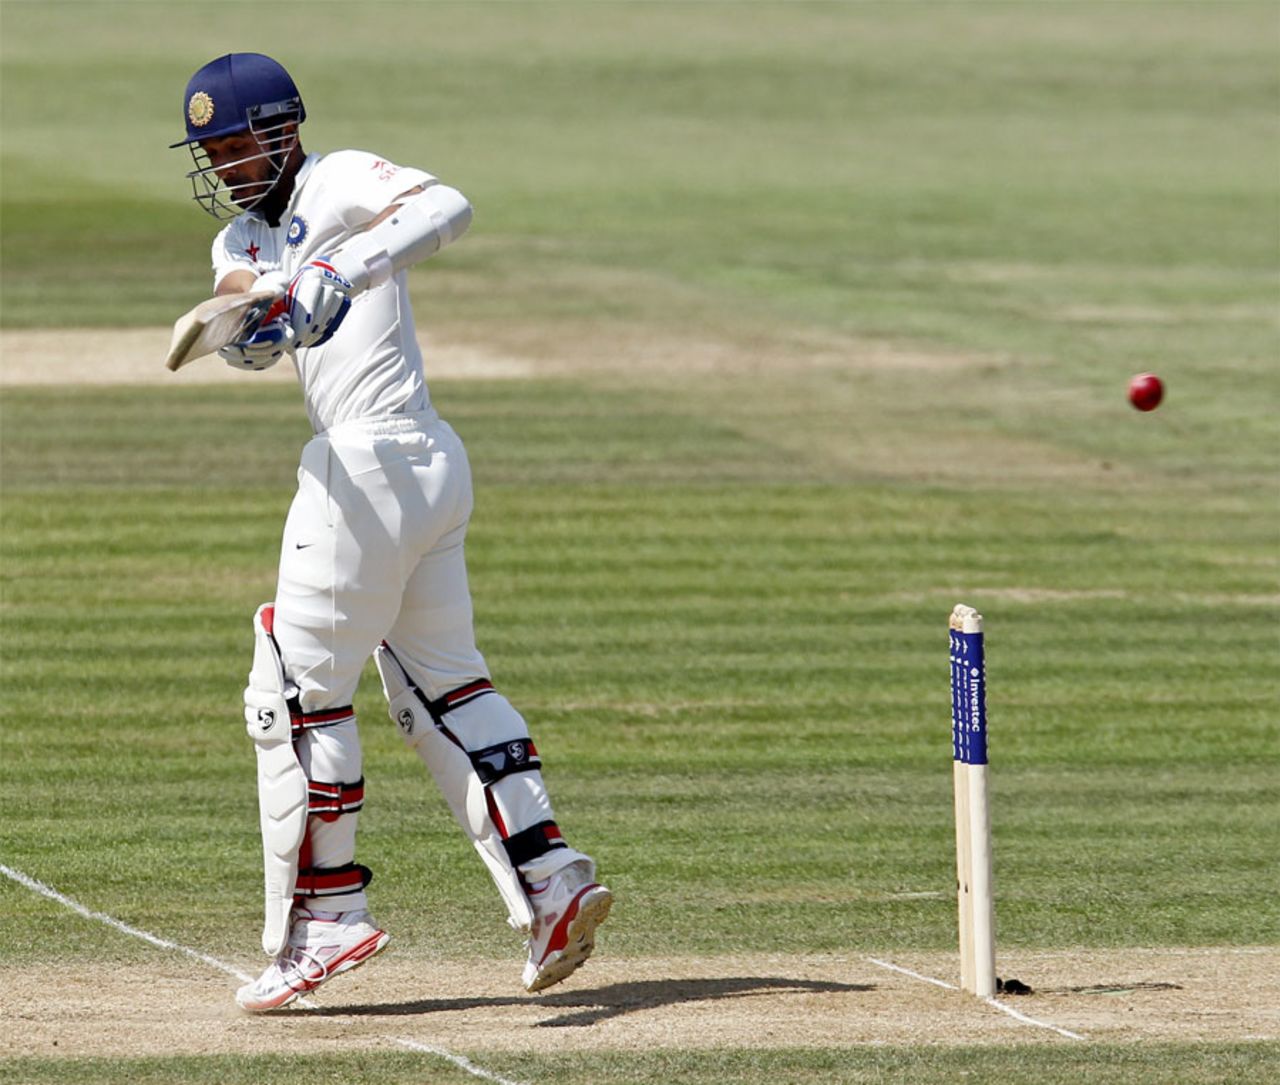 Ajinkya Rahane made his fifth fifty-plus score in seven away Tests, England v India, 3rd Investec Test, Ageas Bowl, 3rd day, July 29, 2014